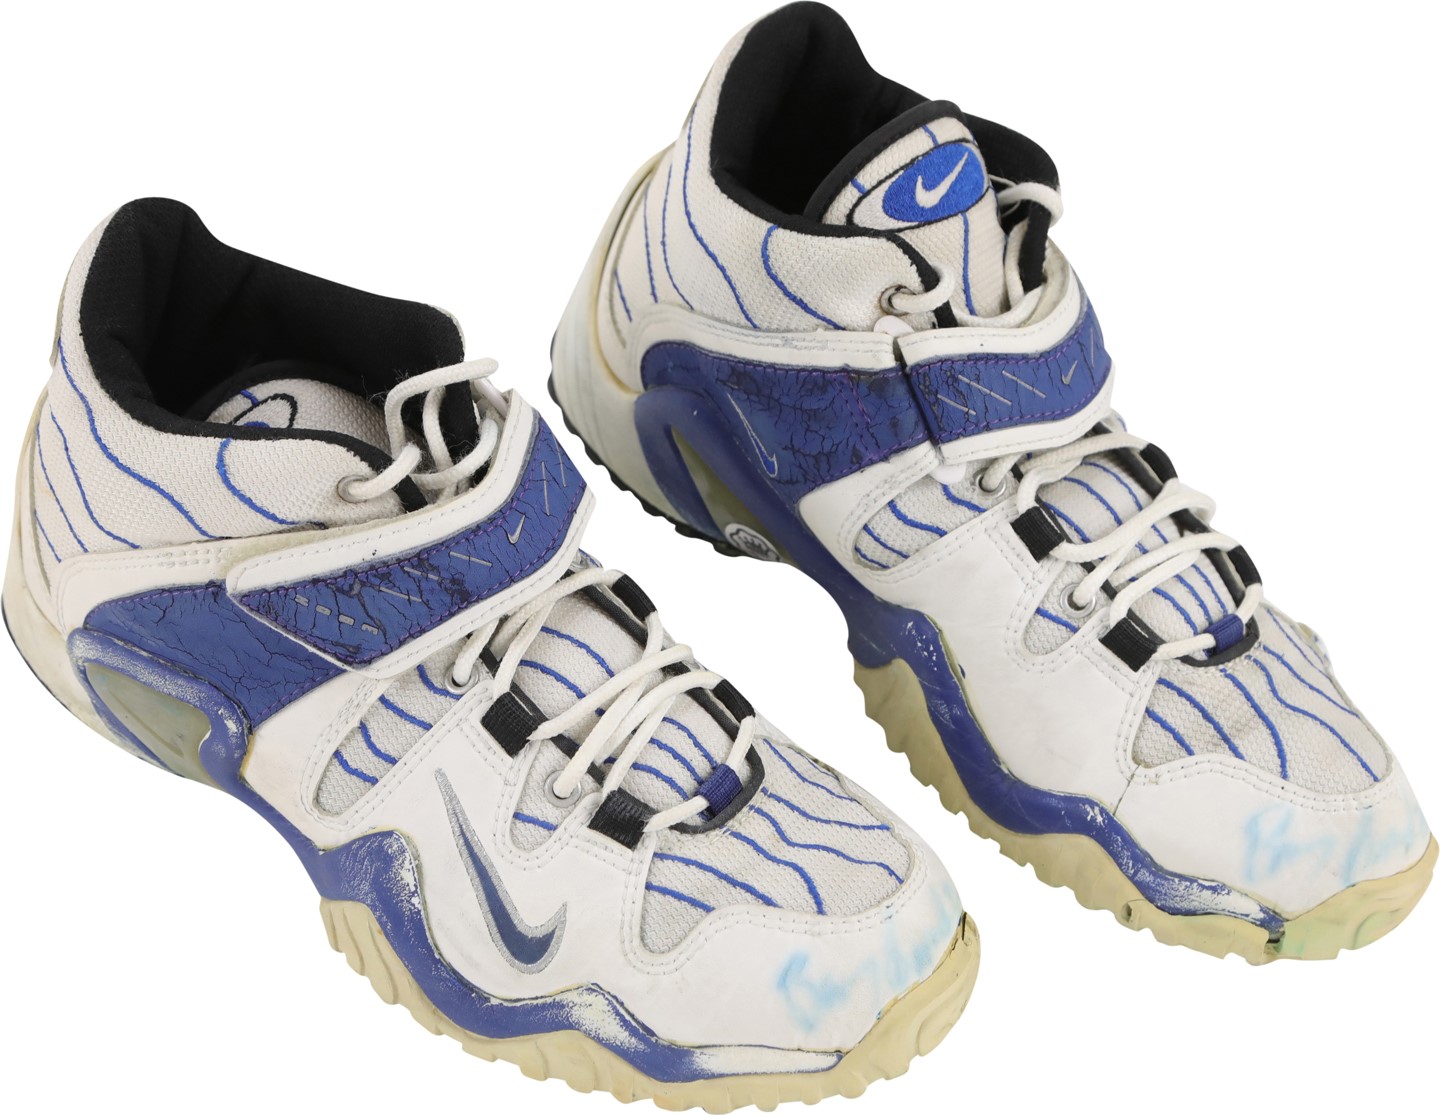 - Historic 1997 Barry Sanders Photo-Matched Detroit Lions Signed Game Worn Turf Shoes - Sanders Surpasses 2,000 Yard and Moves to #2 on All-Time Rushing List (RGU Photo-Match LOA)